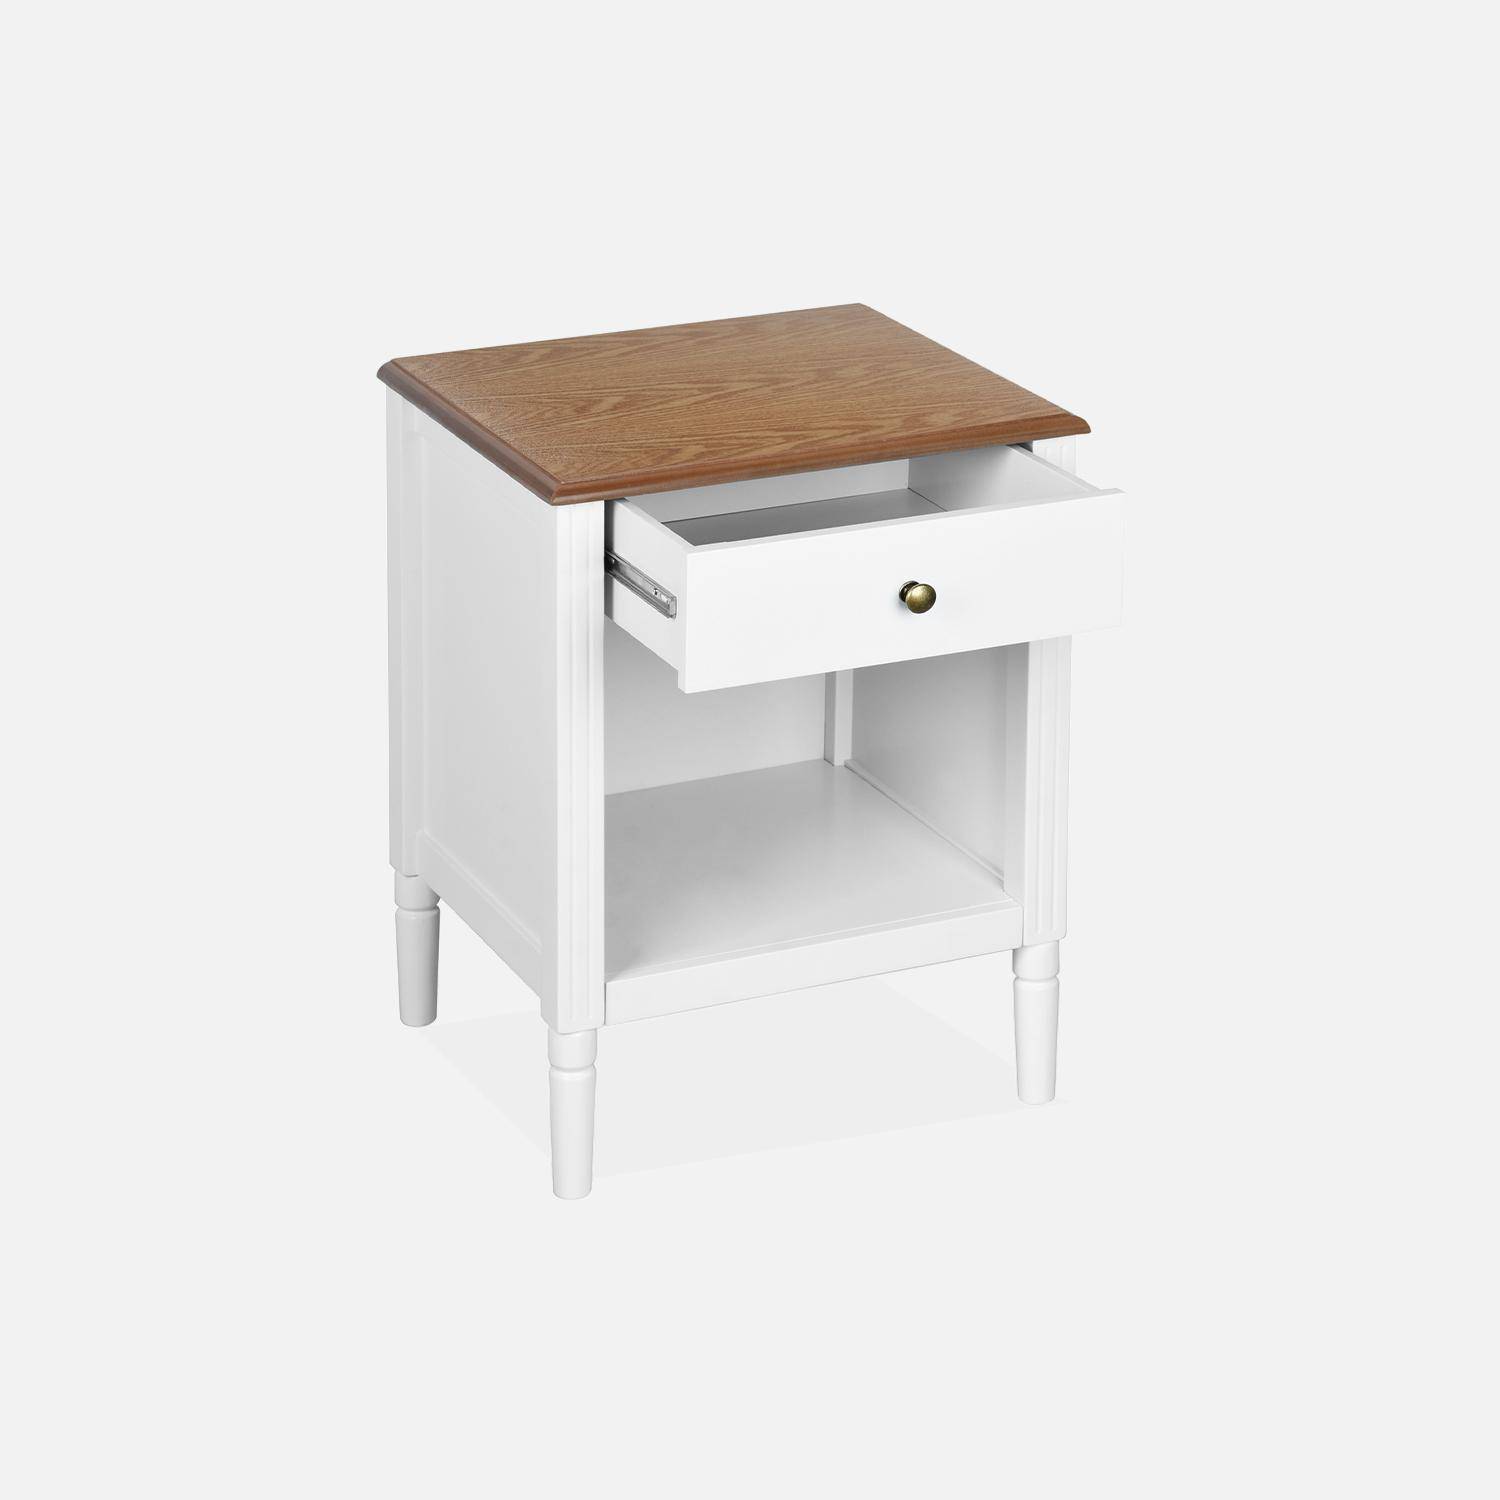 Bedside table with pinewood legs, 45x40x60cm - Celeste - White Photo5